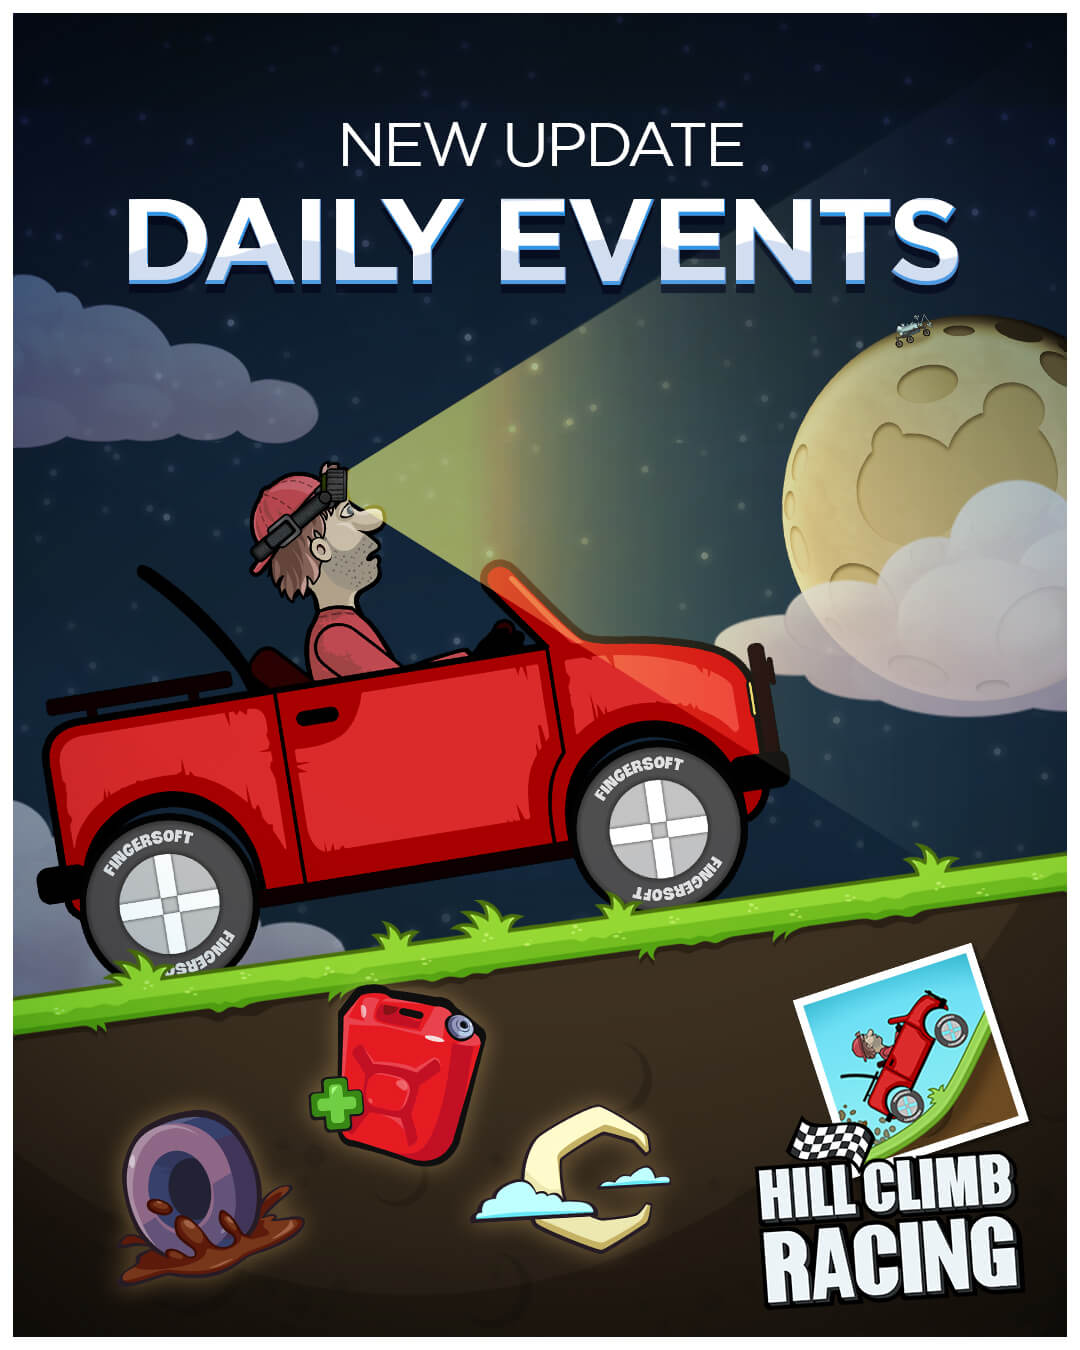 Hill Climb Racing - #FingerFanFridays are always the best day of